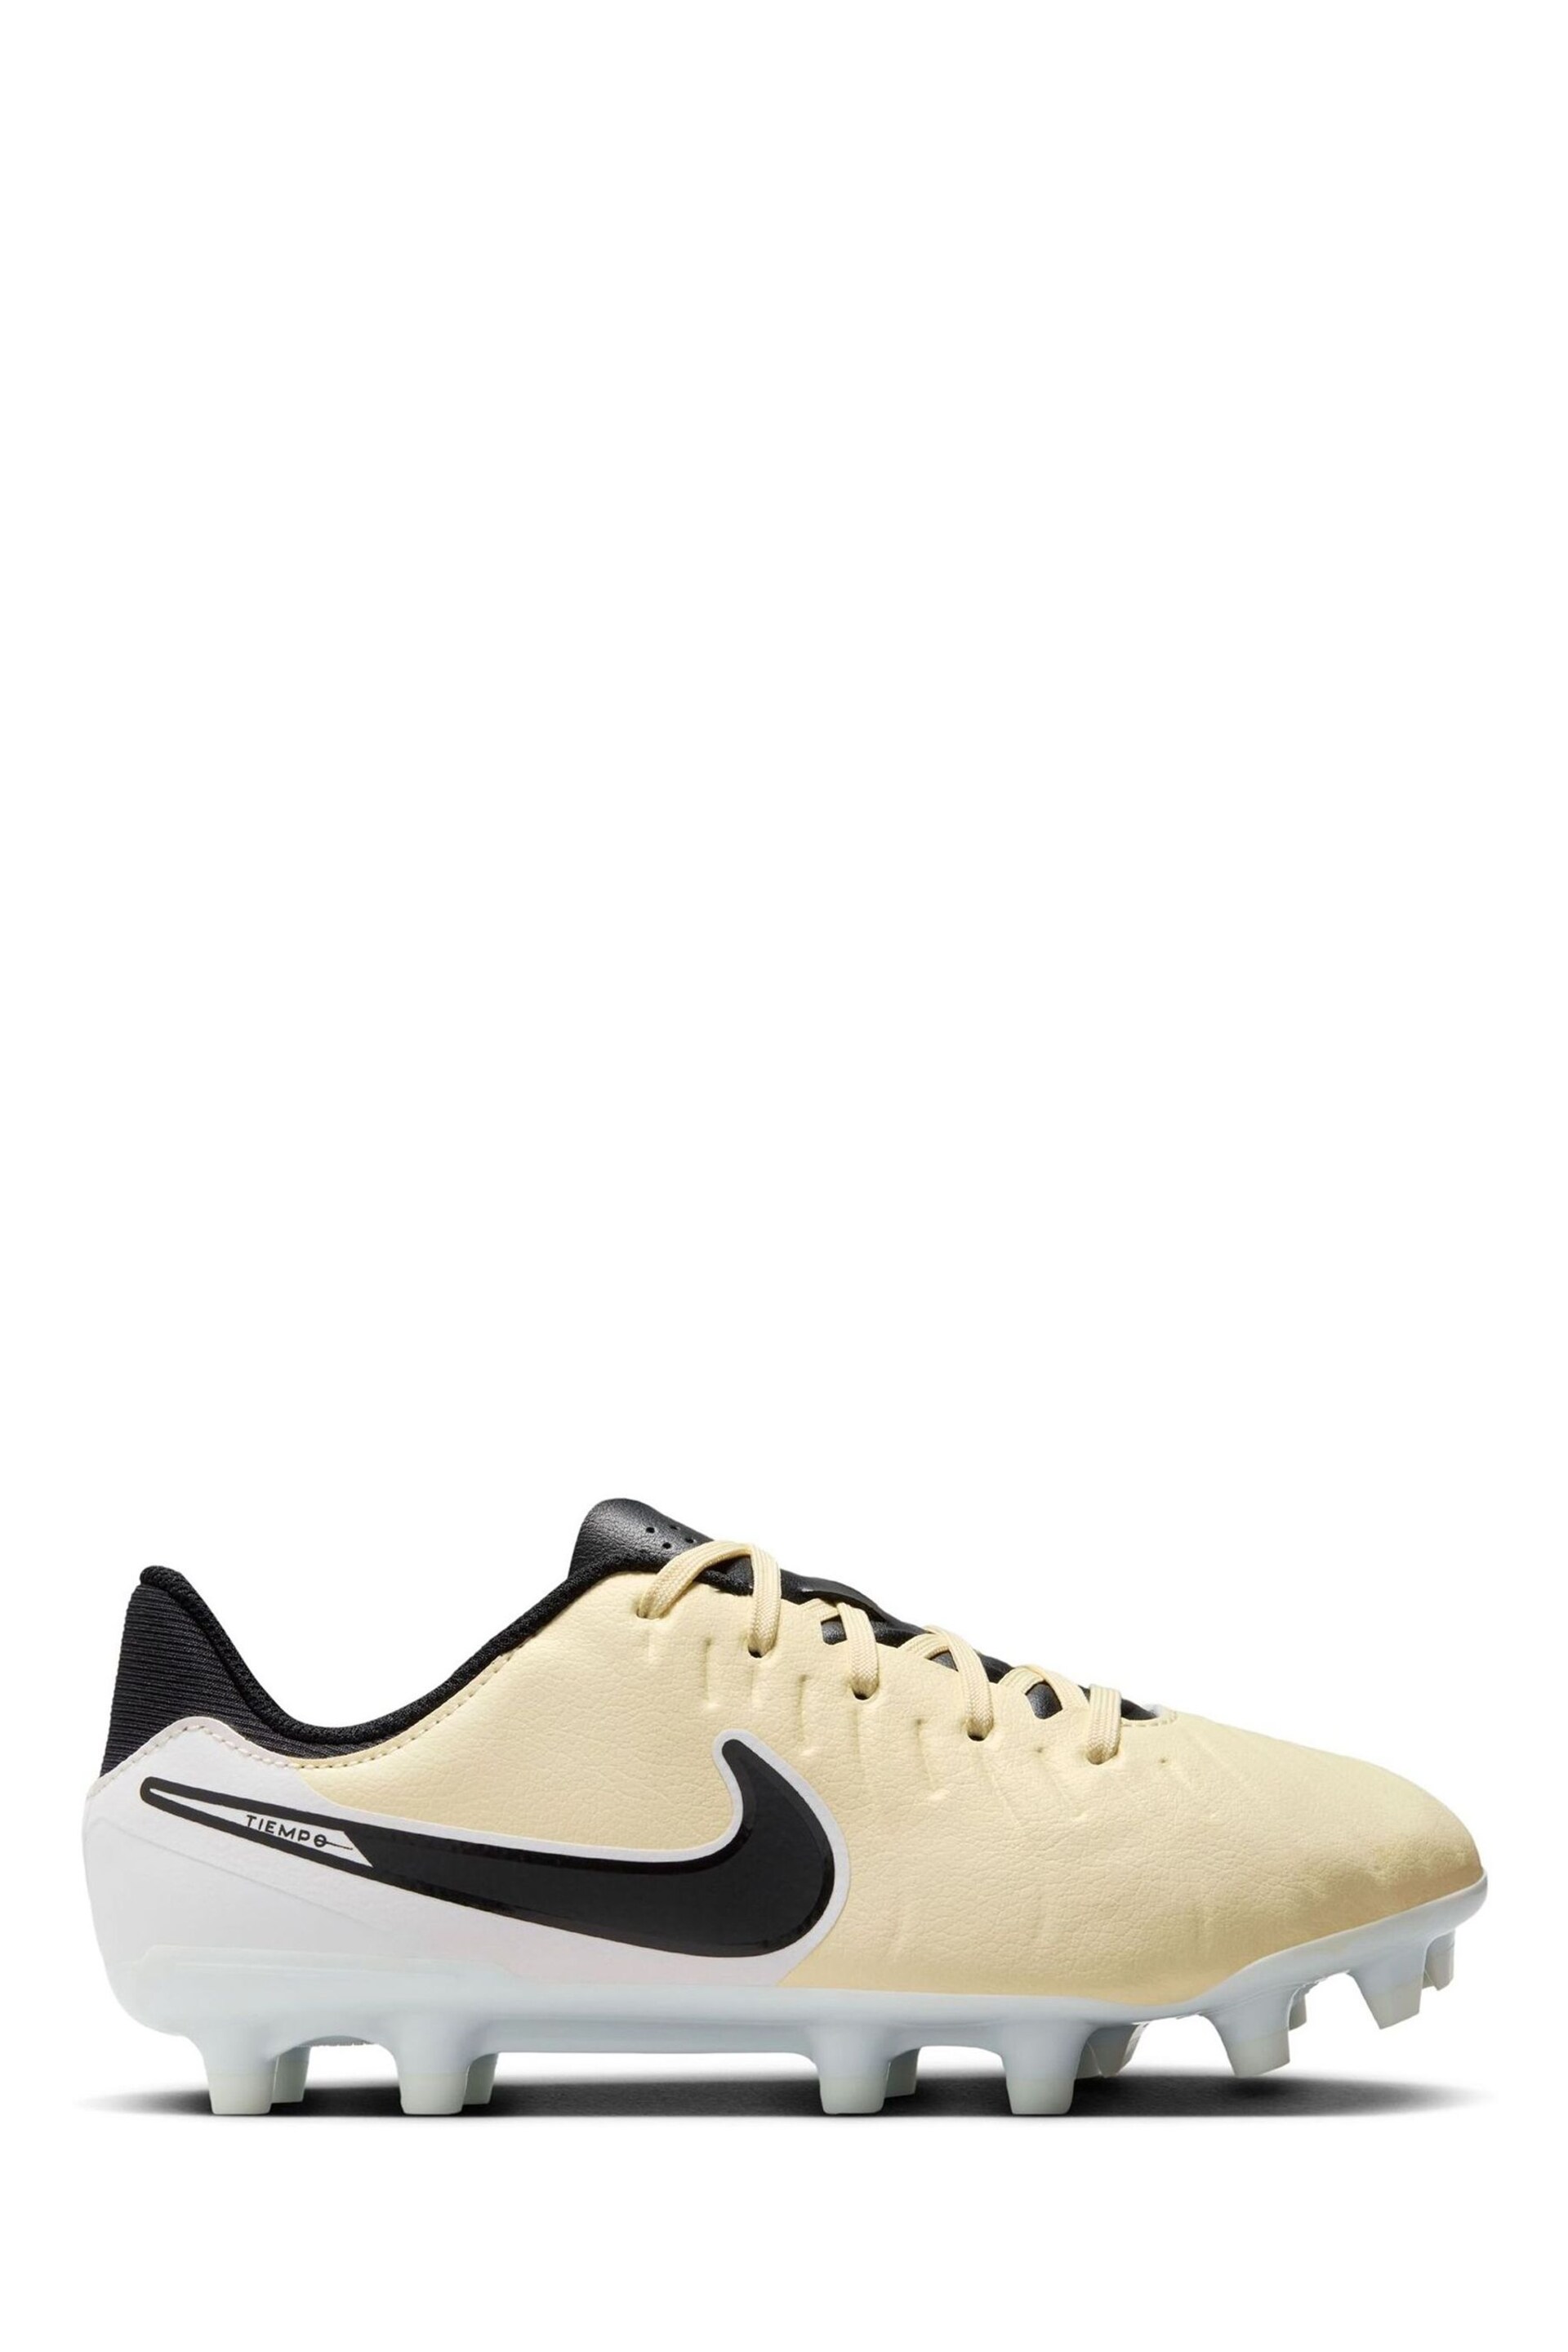 Nike Yellow Jr. Tiempo Legend 10 Academy Multi Ground Football Boots - Image 1 of 11